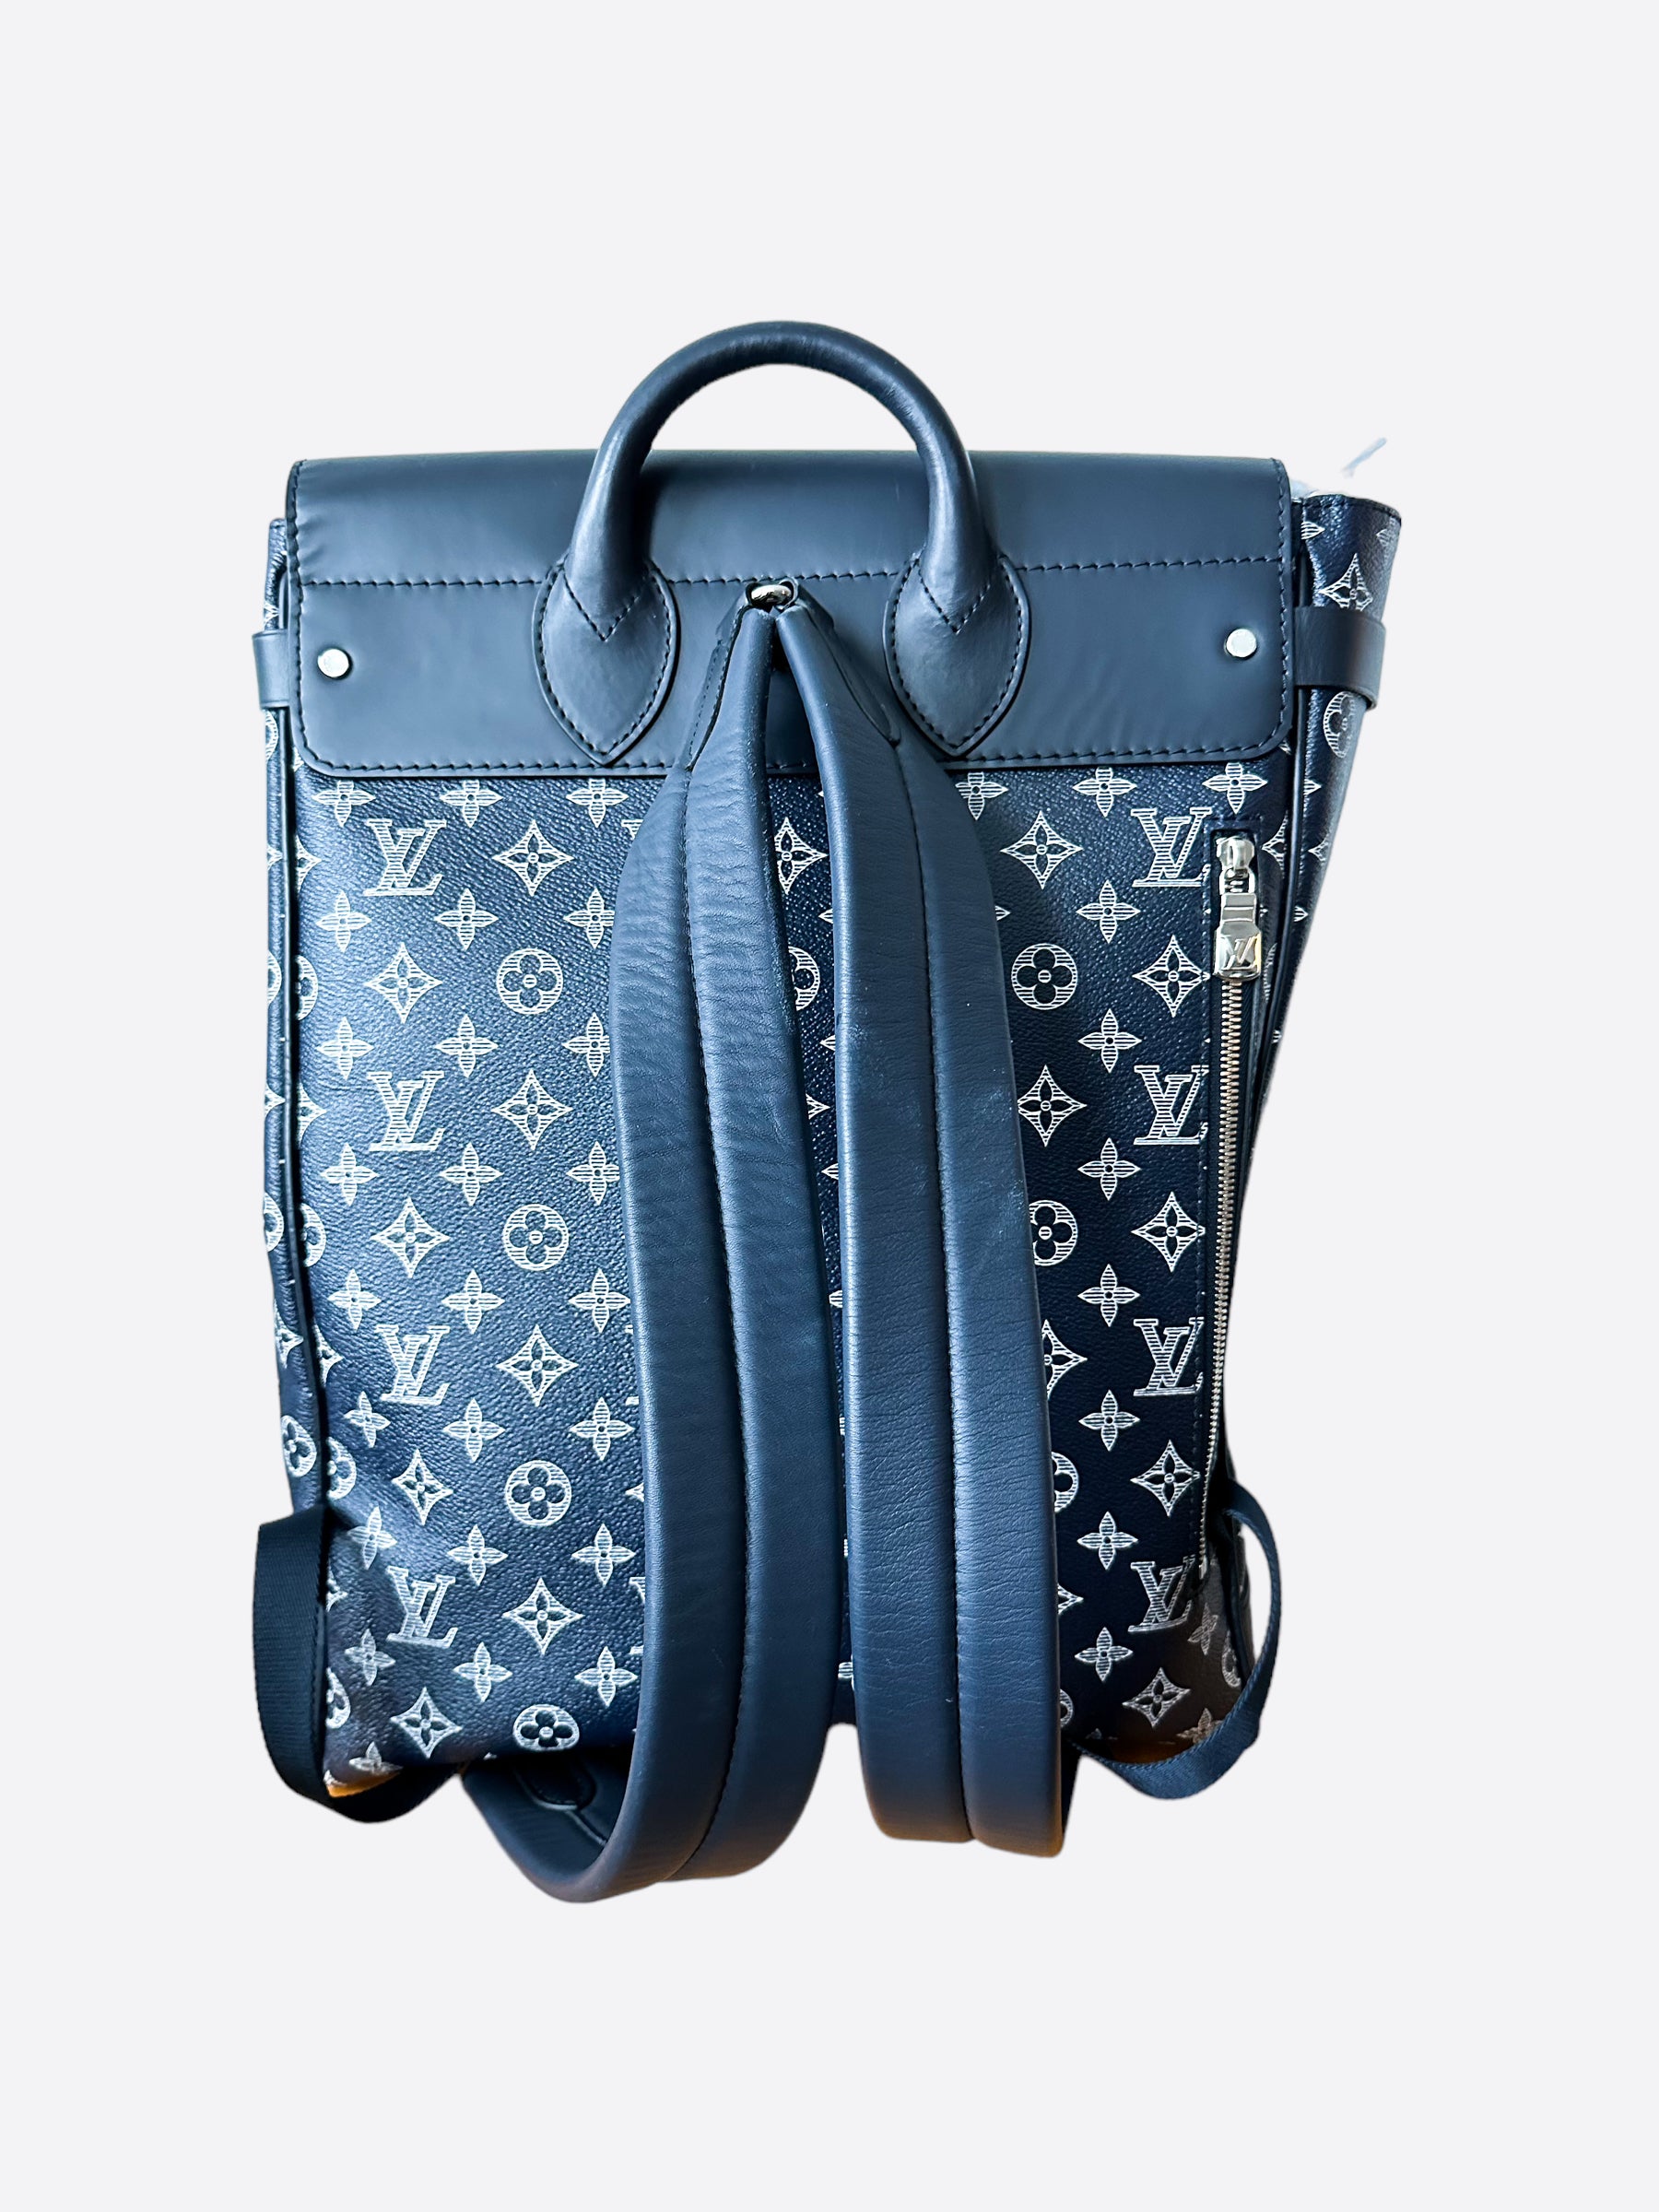 Man with blue leather Louis Vuitton backpack with elephant before